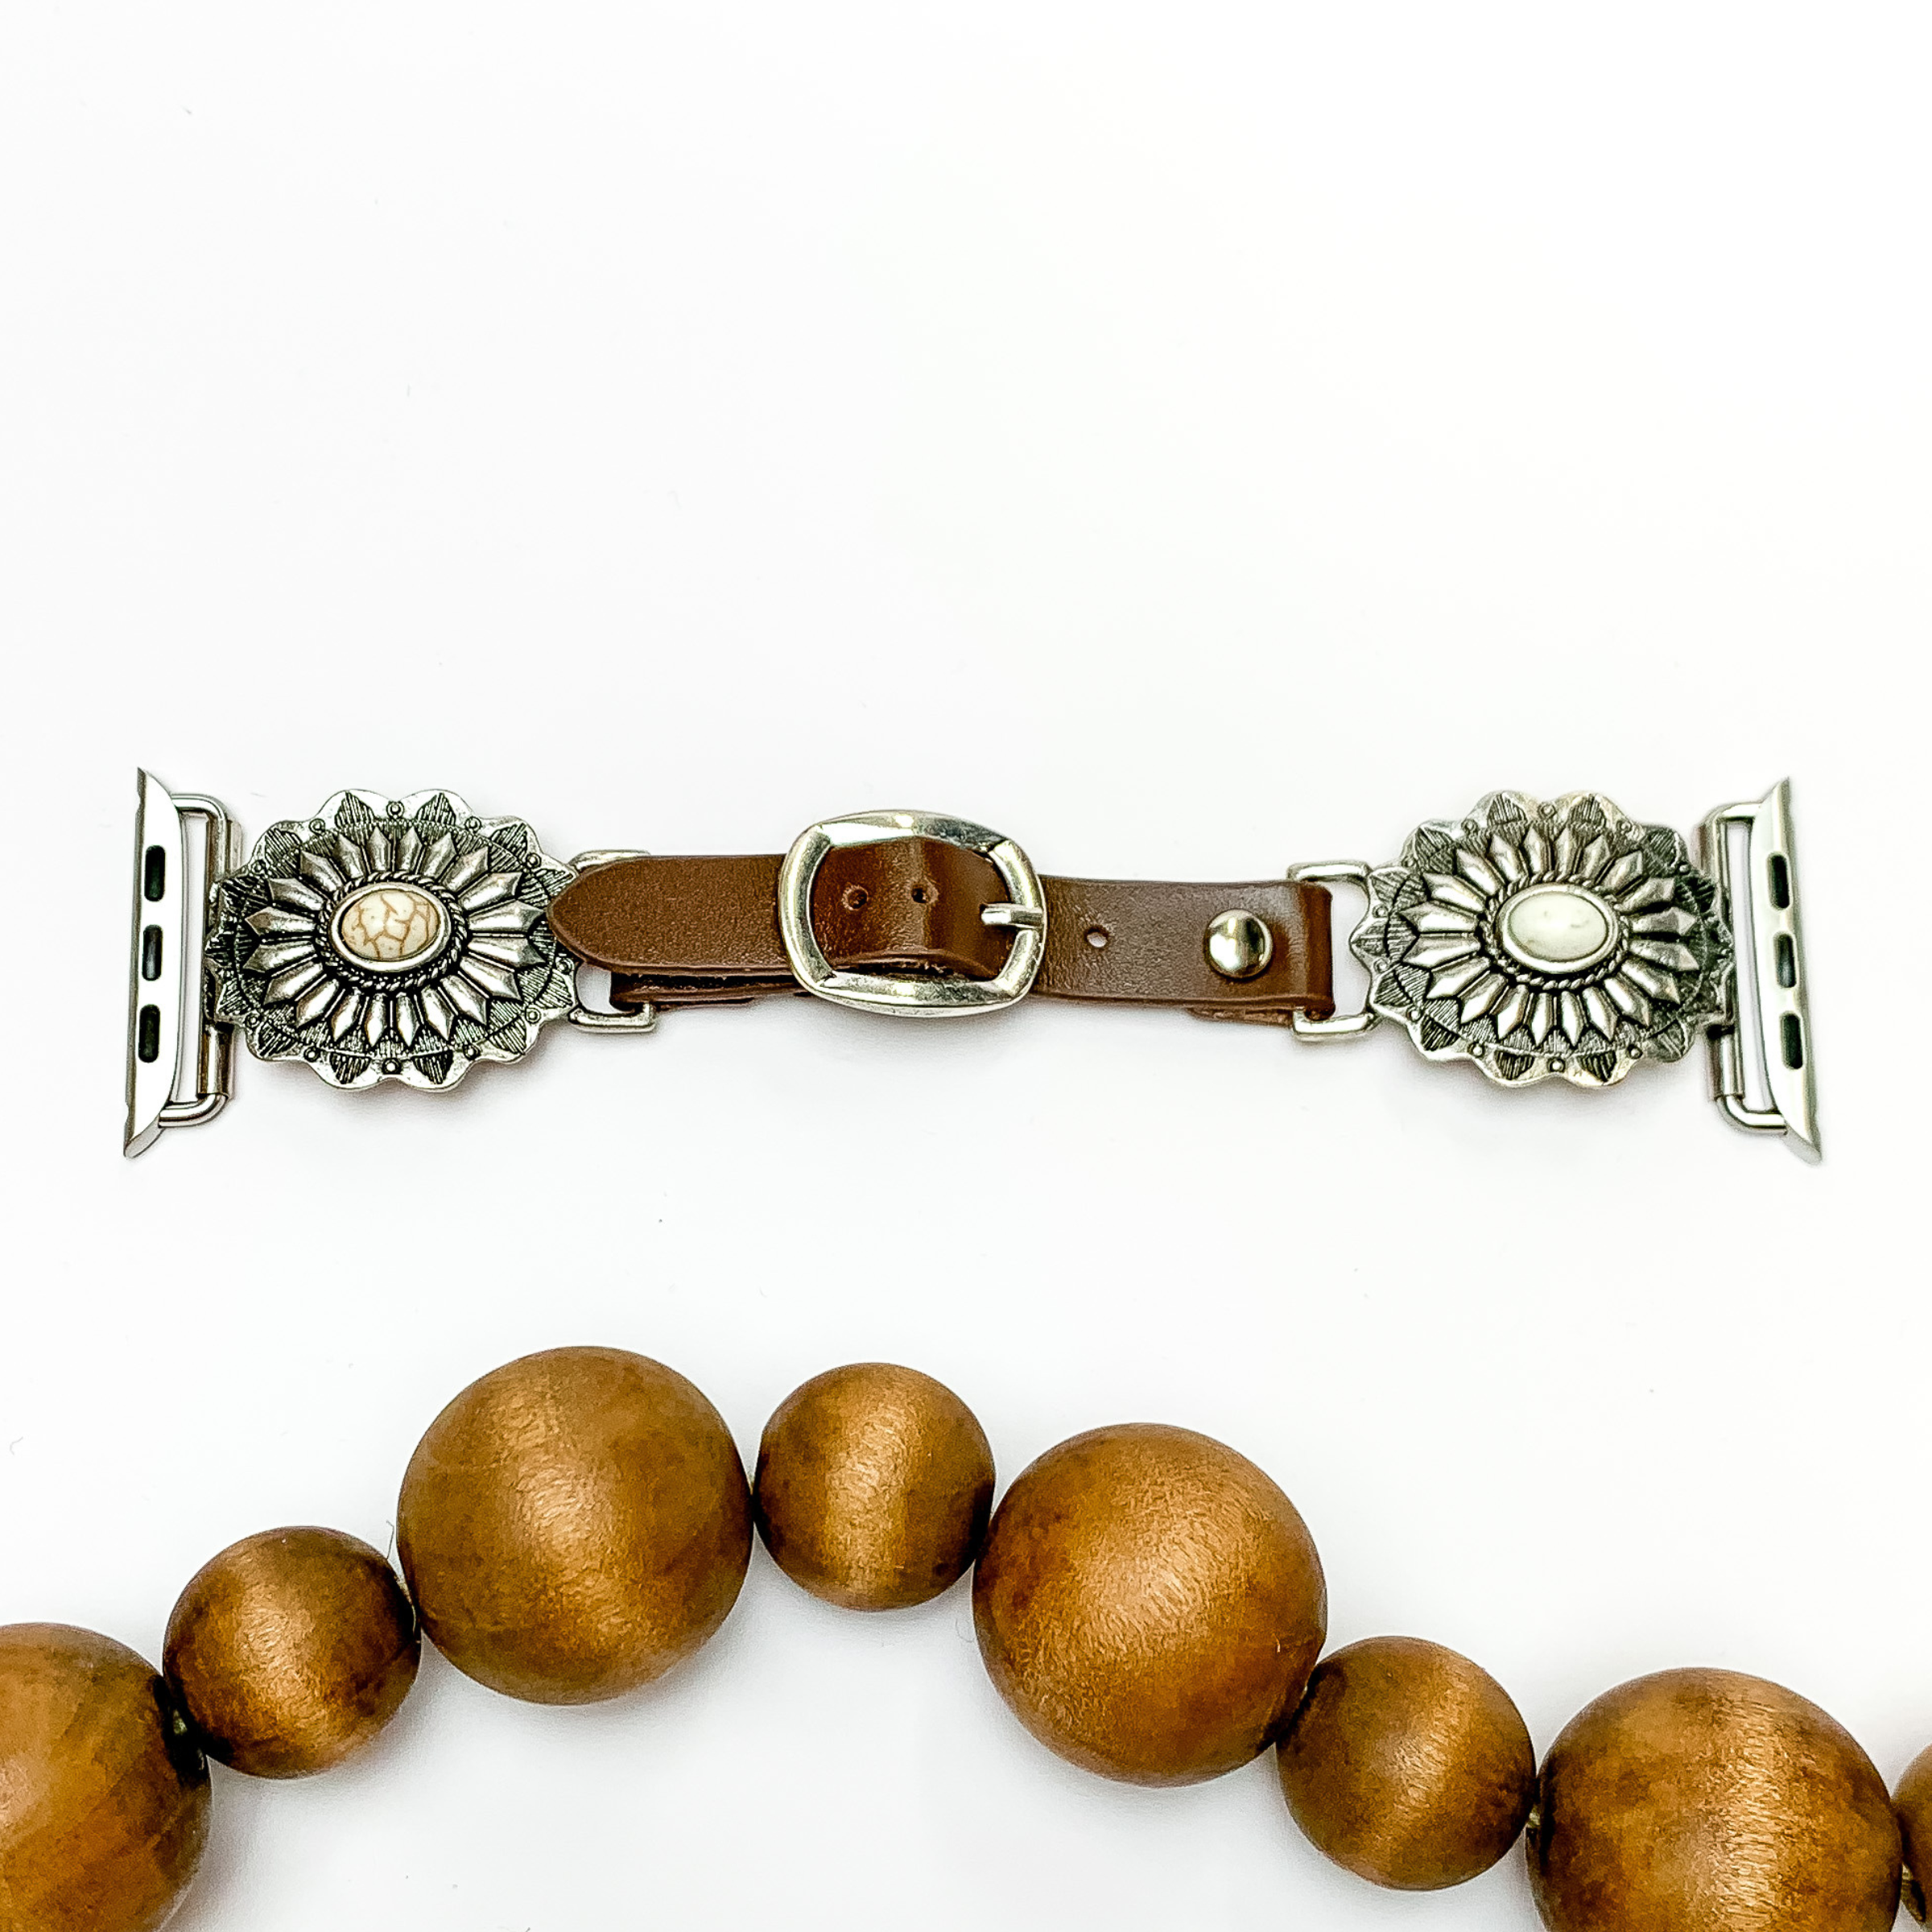 Dark Brown watch band with silver, oval concho pendants and Apple watch band acessories. The pendants include rows a center ivory stone. This watch band is pictured on a white background with brown beads below the band. 